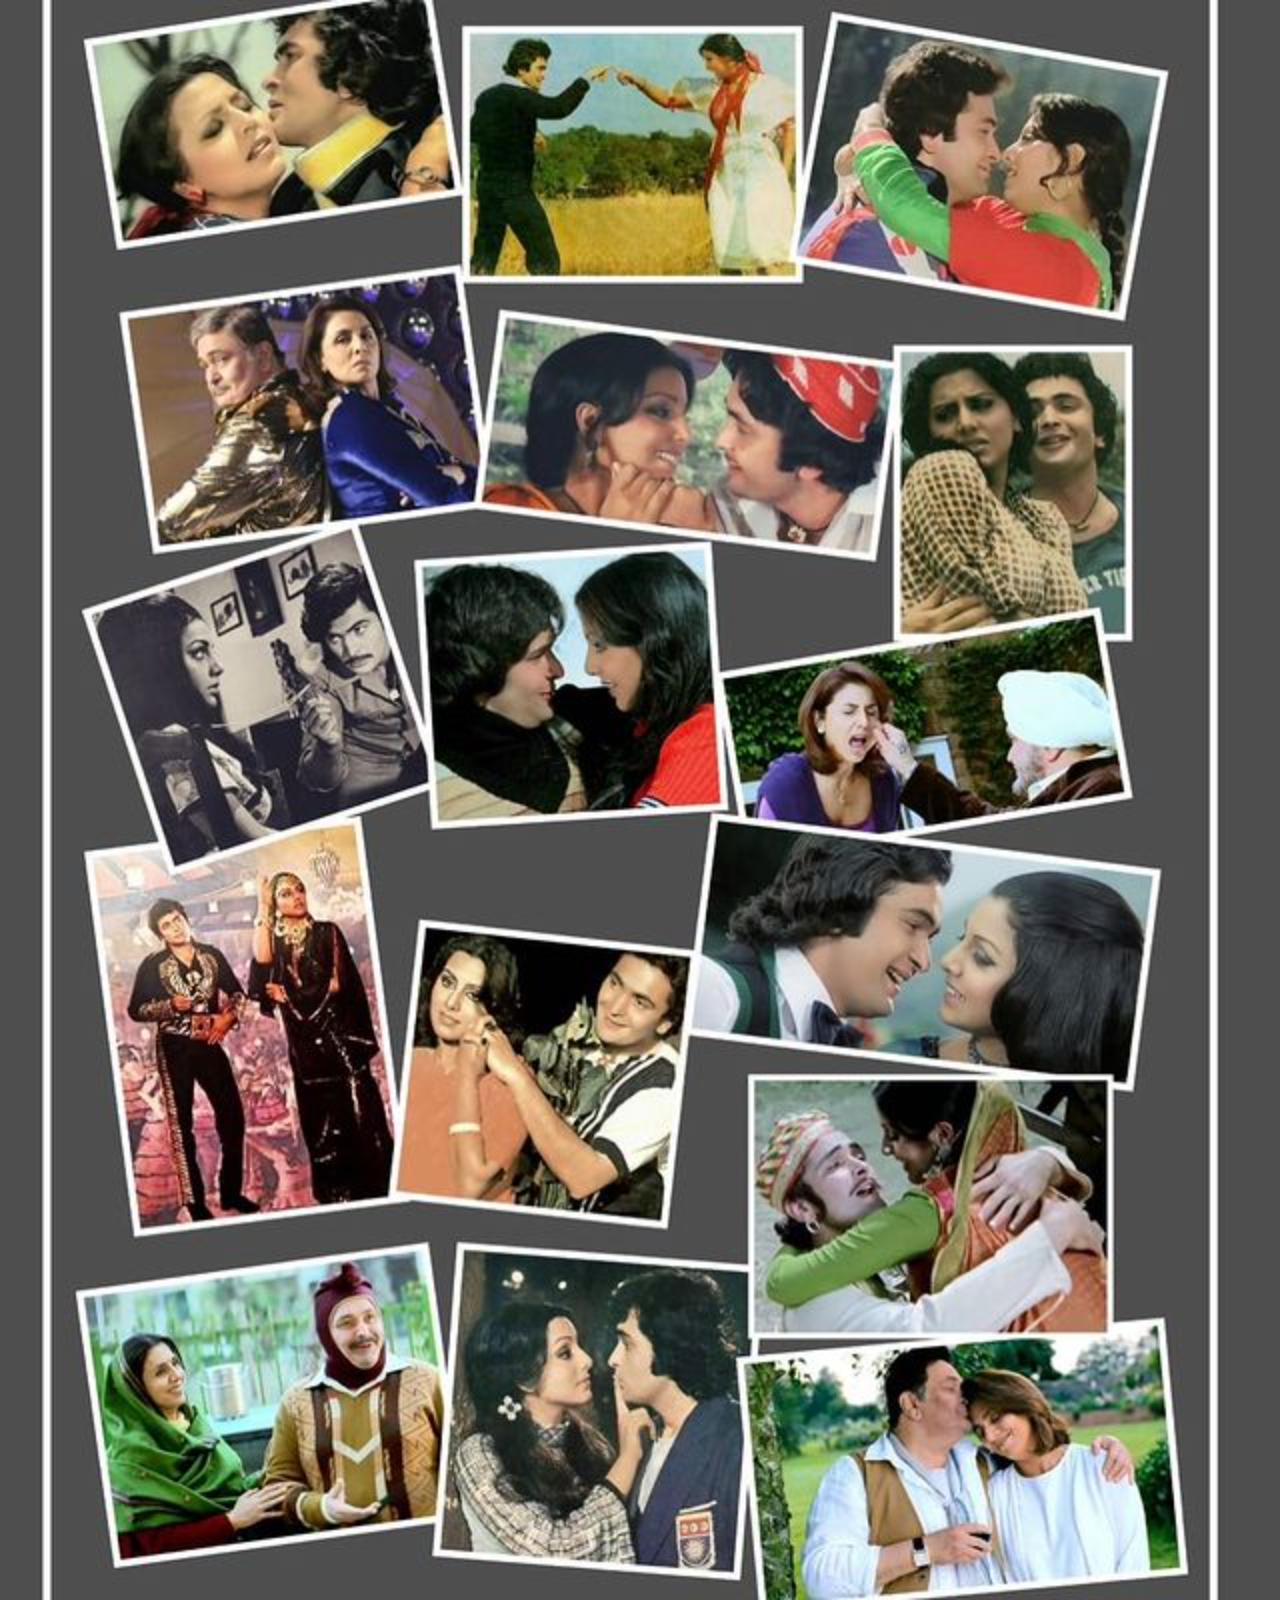 The picture shared by the actress is a collage of all the film Neetu Kapoor and Rishi Kapoor have done together